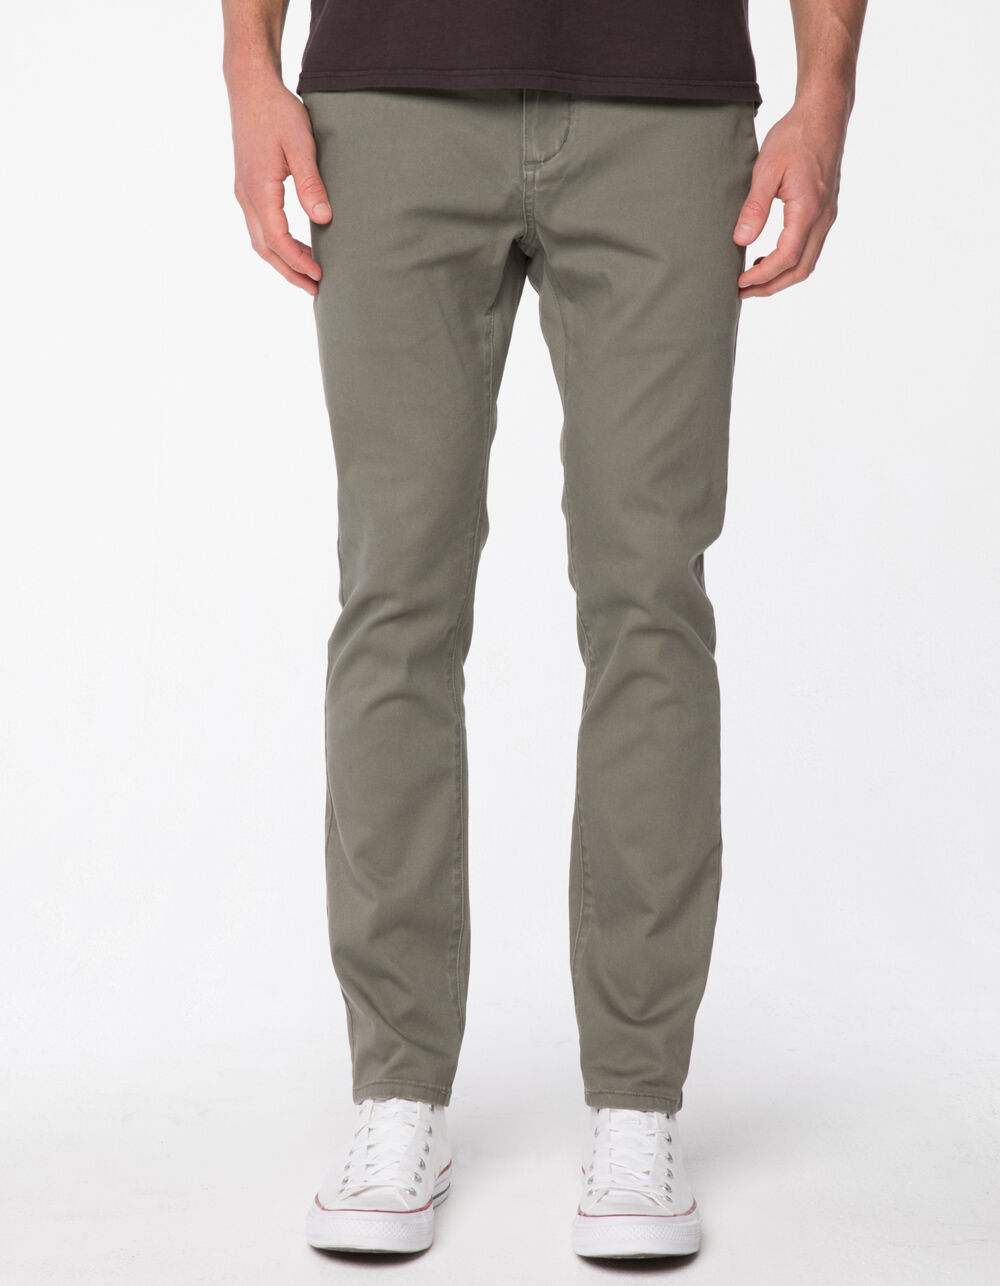 RSQ Seattle Skinny Taper Heather Olive Mens Chino Pants - HEATHER OLIVE ...